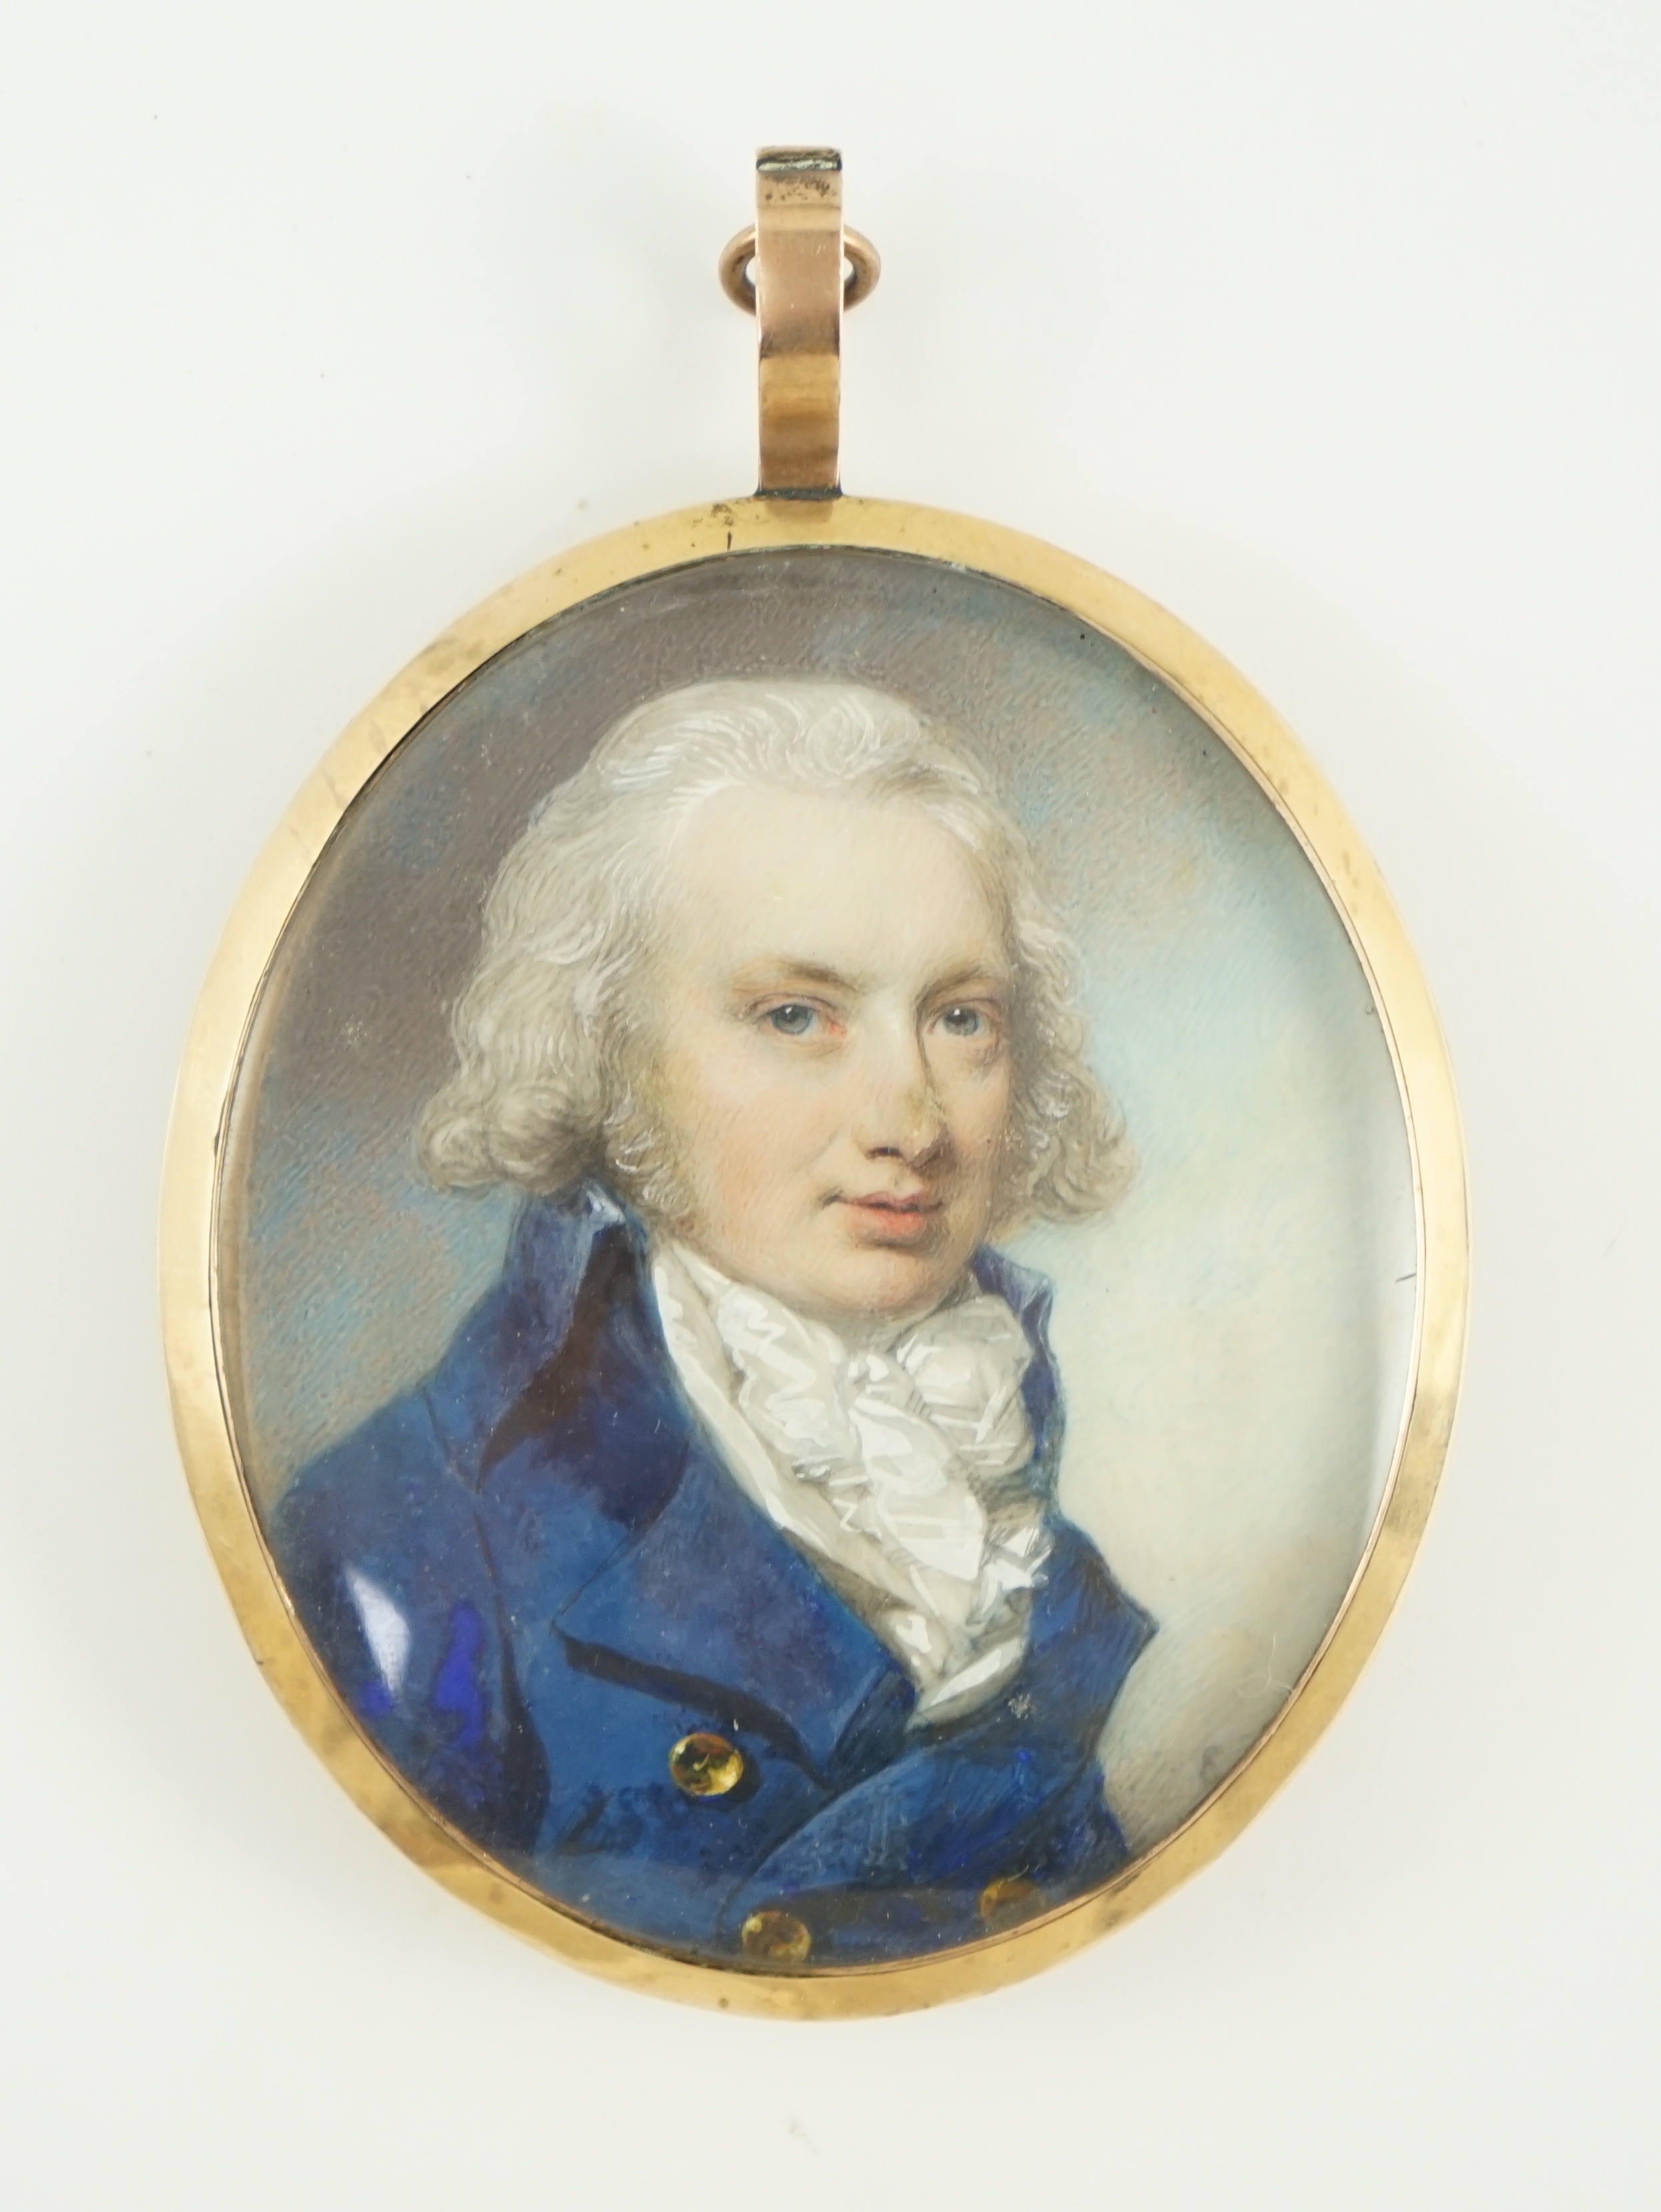 George Engleheart (1750-1829), Portrait miniature of a gentleman, watercolour on ivory, 6 x 5cm. CITES Submission reference BDTXA84Q